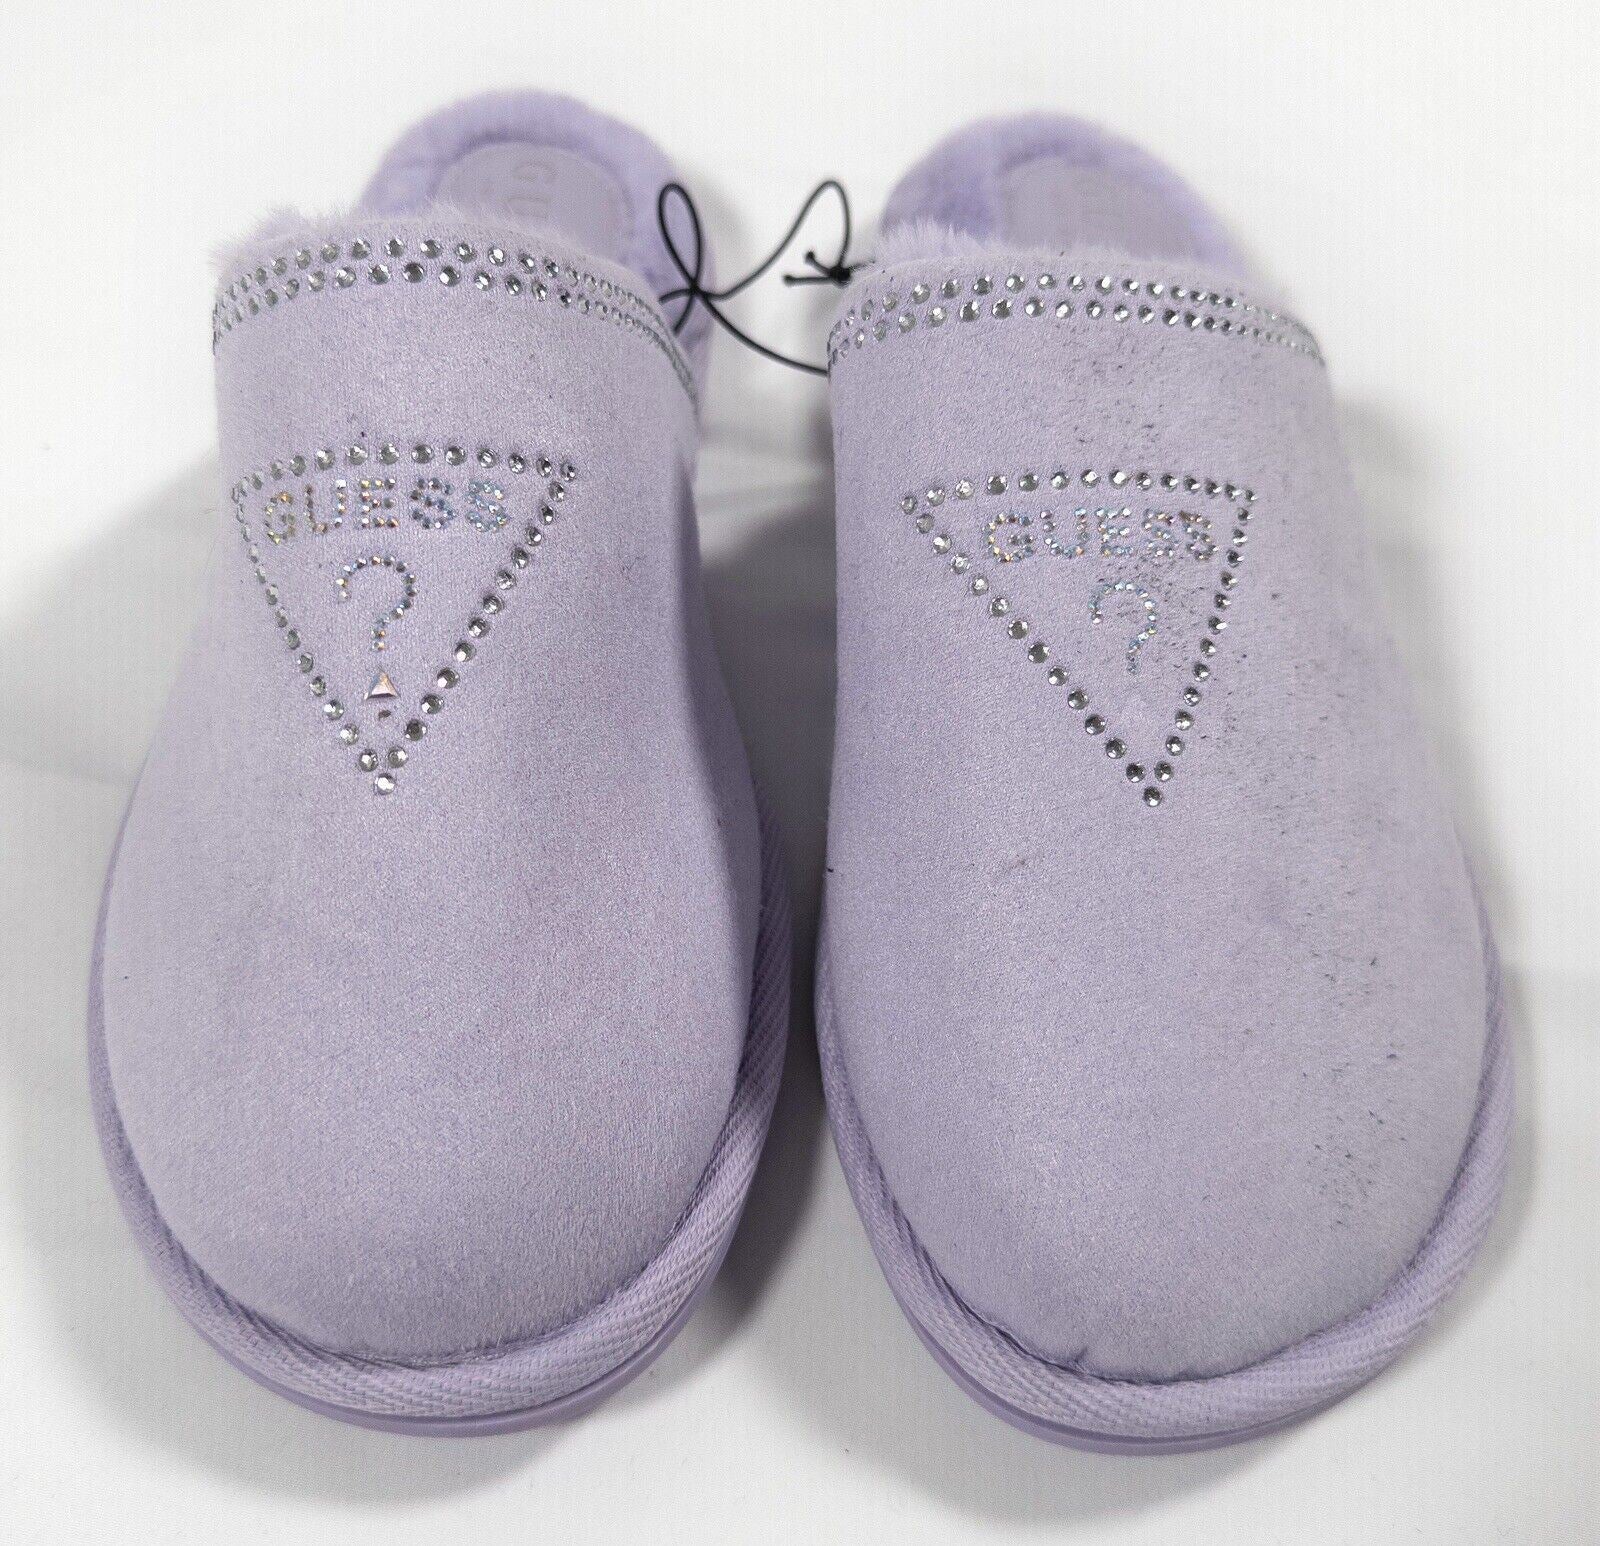 GUESS Women's Lilac Fluffy Slip On Slippers Size UK 6